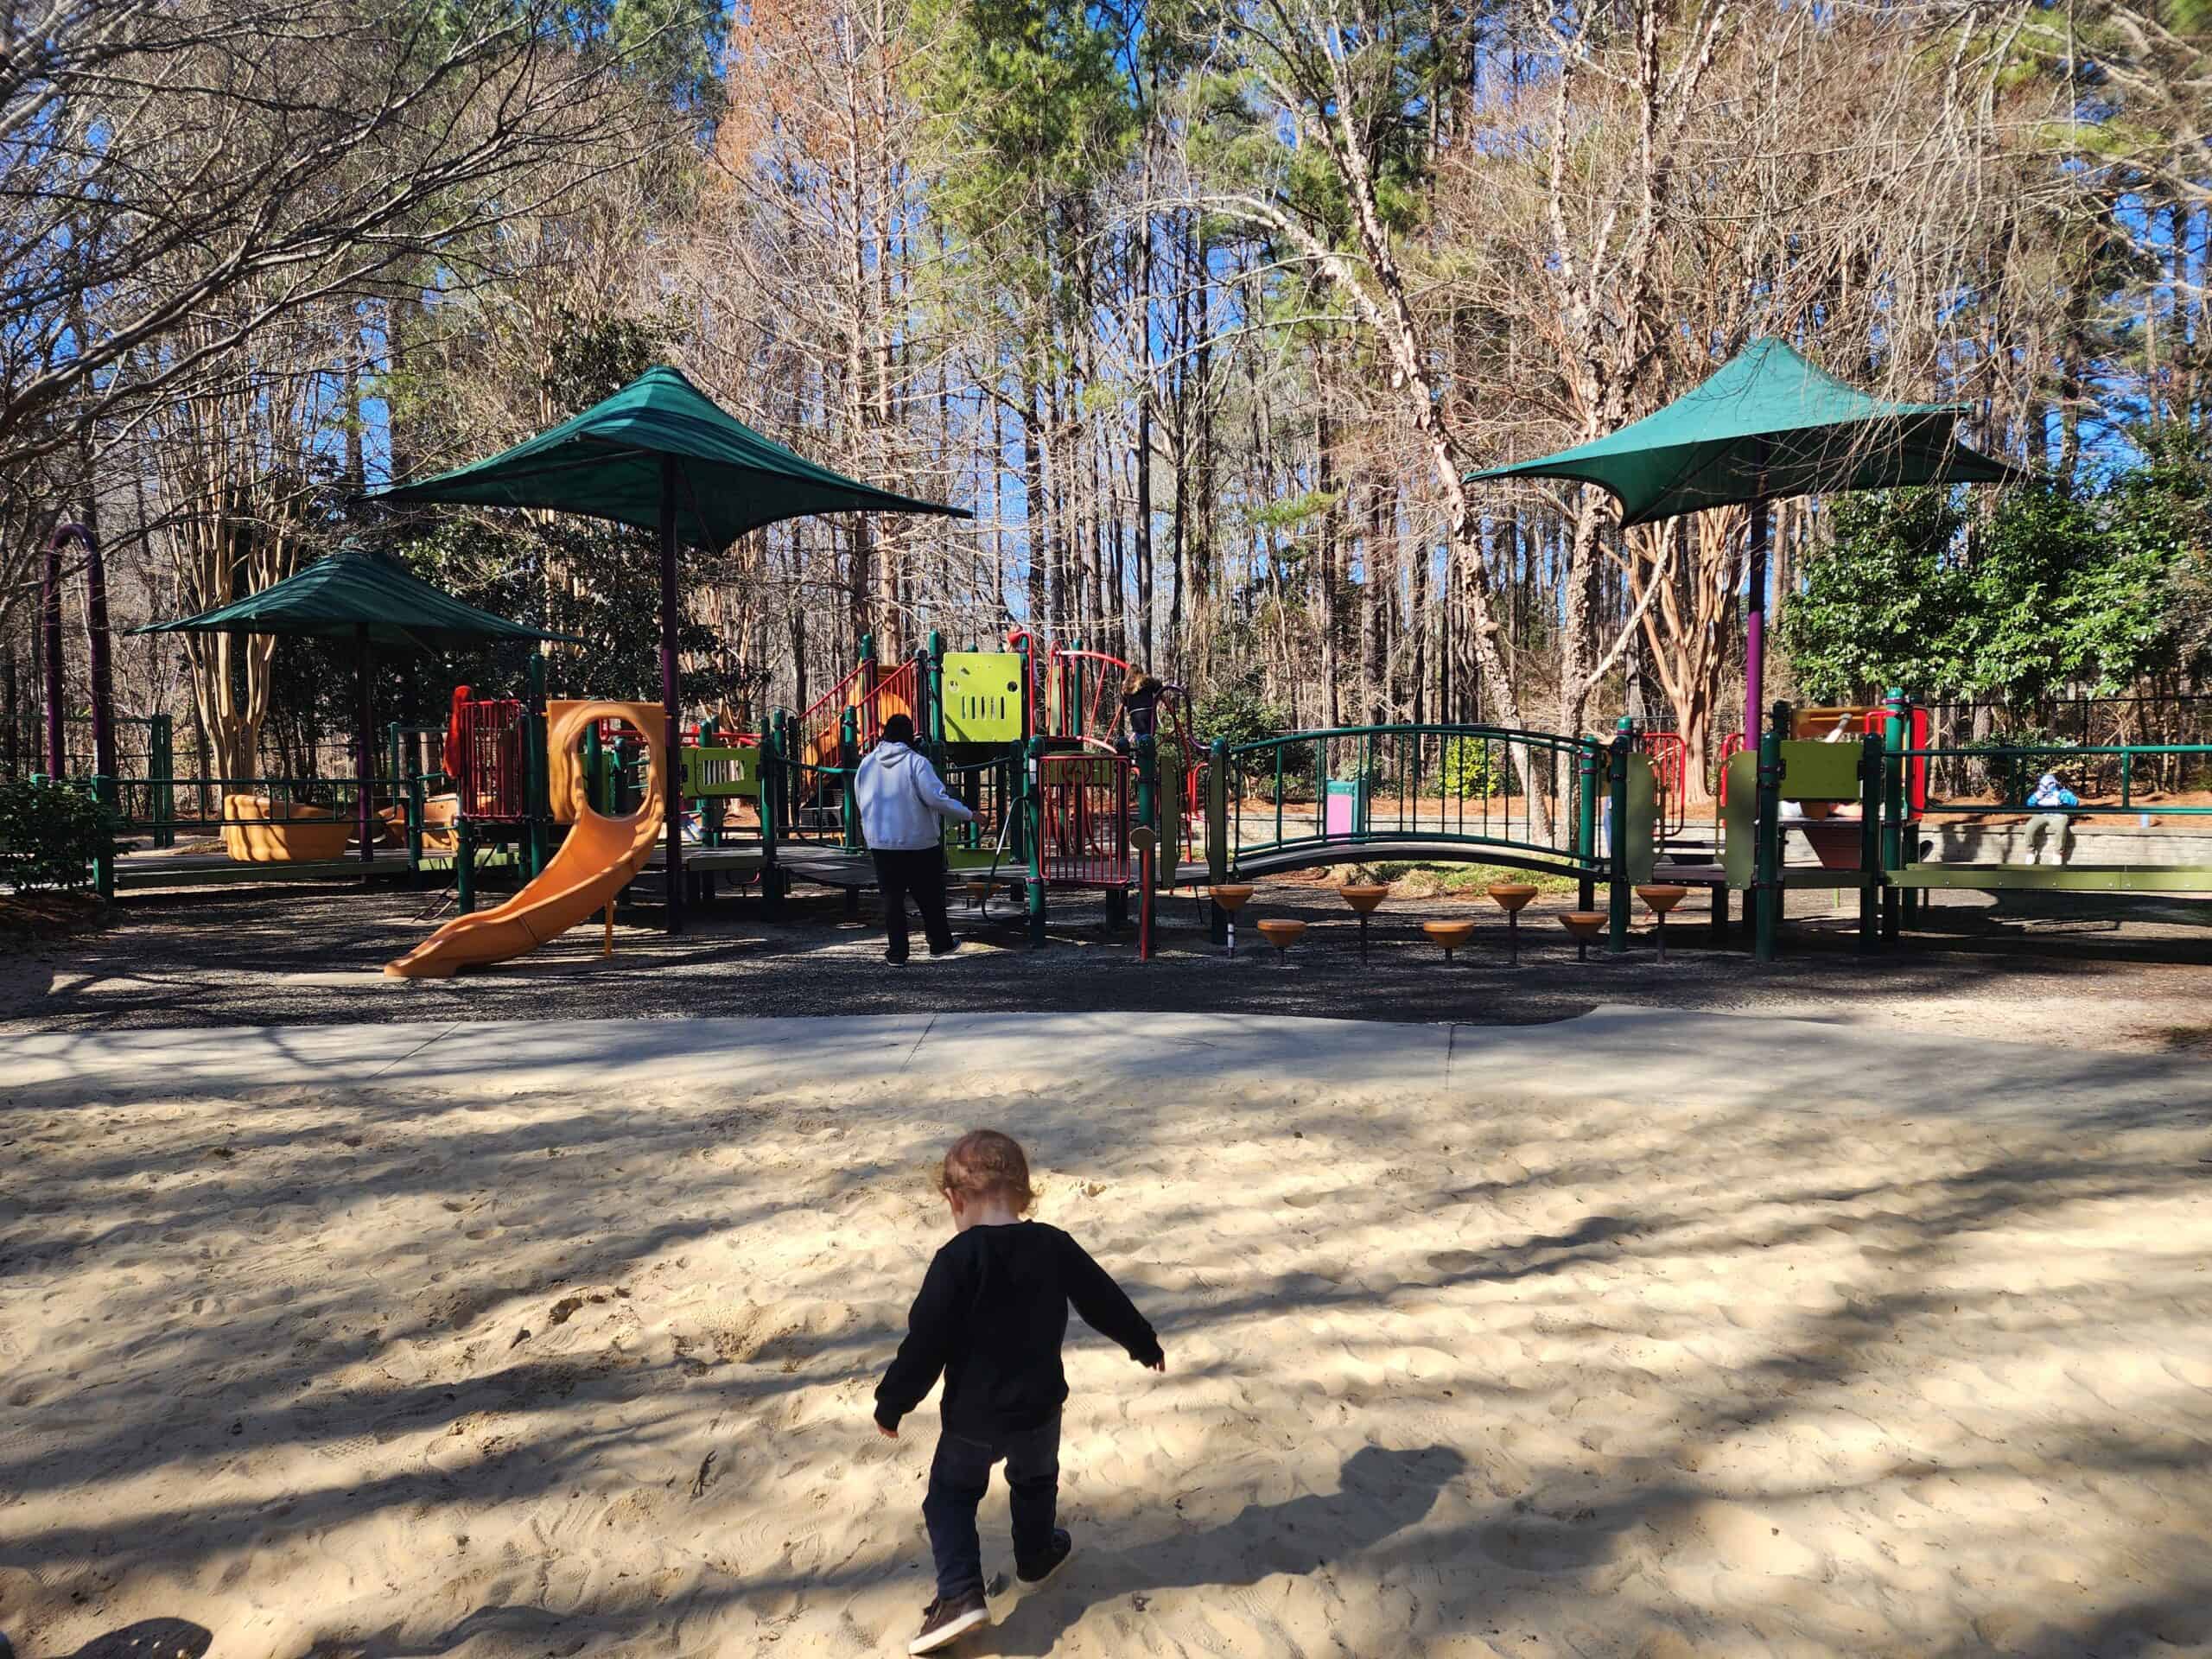 A child runs towards the inviting play area at a sunny playground in Cary, North Carolina, surrounded by tall pine trees. The playground features various equipment with shades of green canopies, sand-covered ground, and is filled with the energy of children's playtime activities.